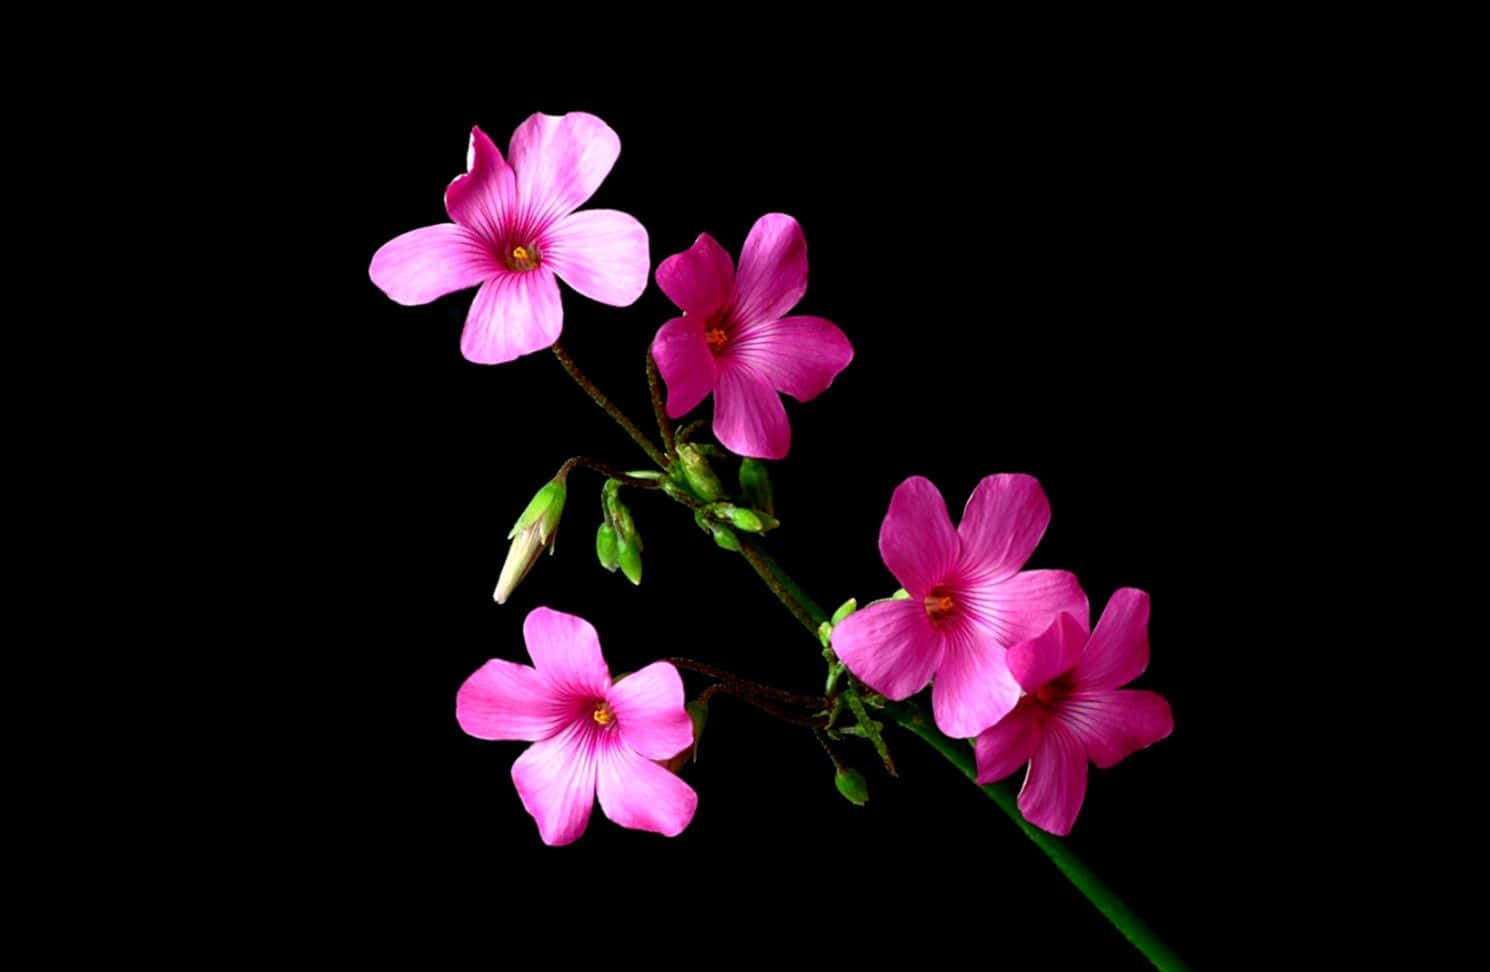 A Pink Flower Is On A Stem Against A Black Background Wallpaper